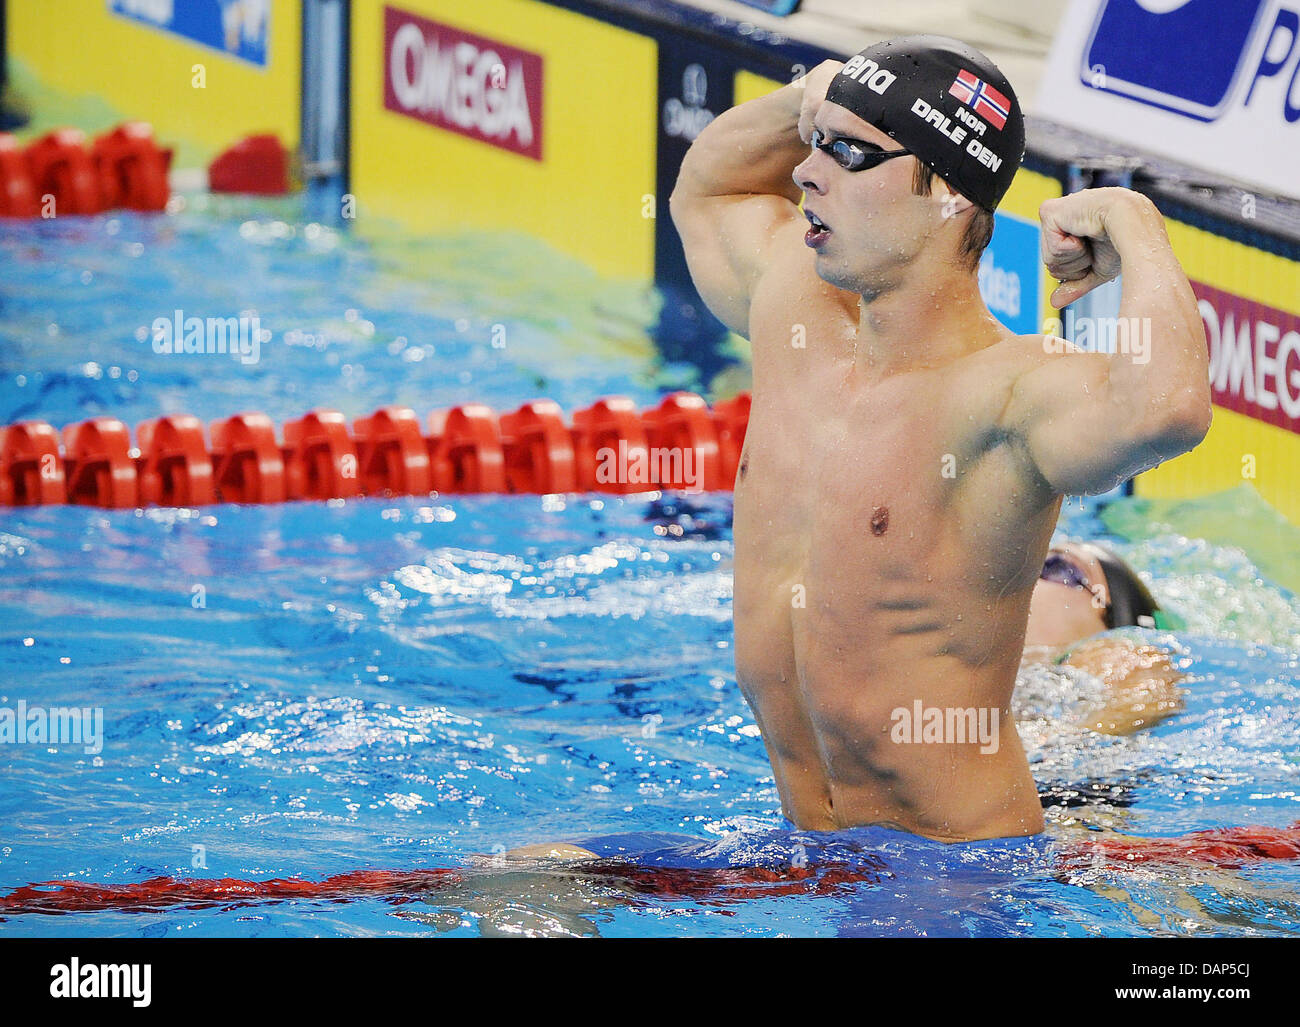 Swimmer Alexander Dale Oen Of Norway Reacts After Winning Mens 100m Breathstroke Final At The